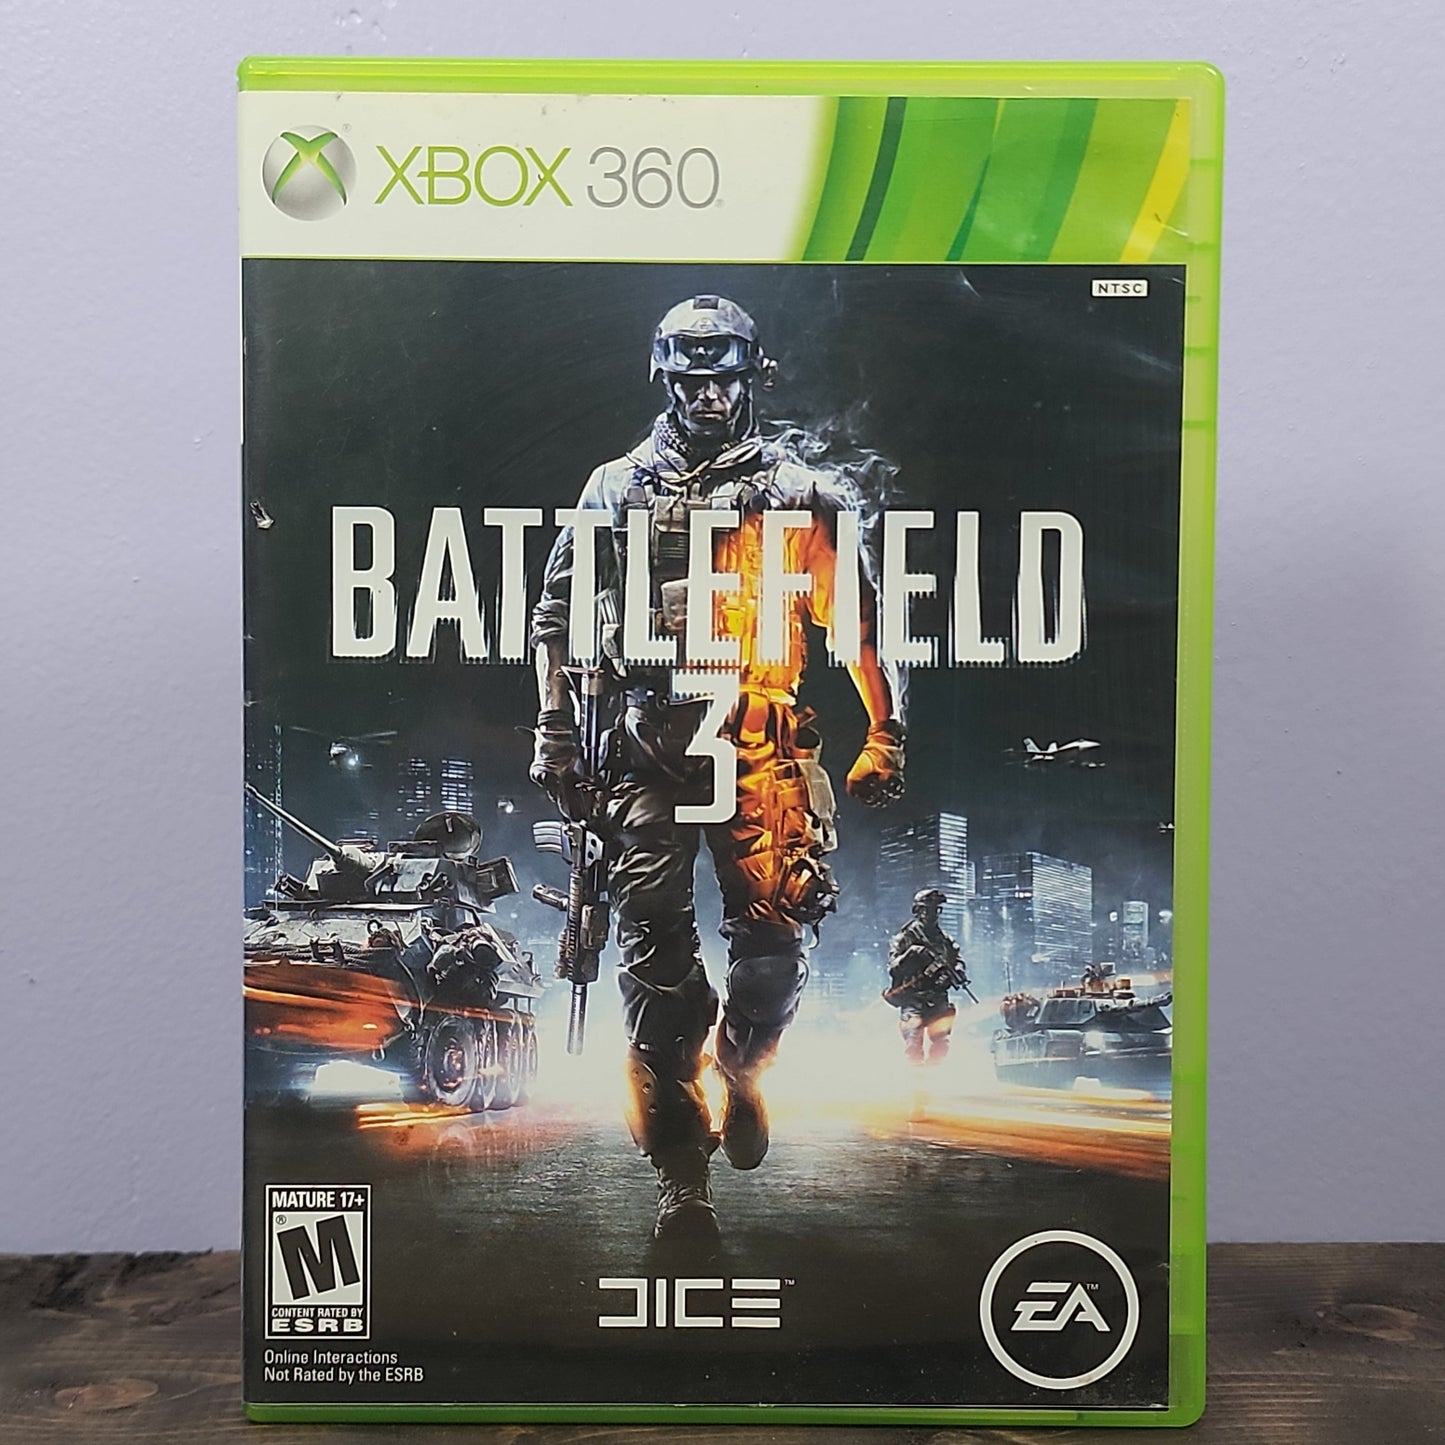 Xbox 360 - Battlefield 3 Retrograde Collectibles Action, Battlefield Series, CIB, DICE, EA, First Person Shooter, FPS, M Rated, Multiplayer, Shooter, Preowned Video Game 